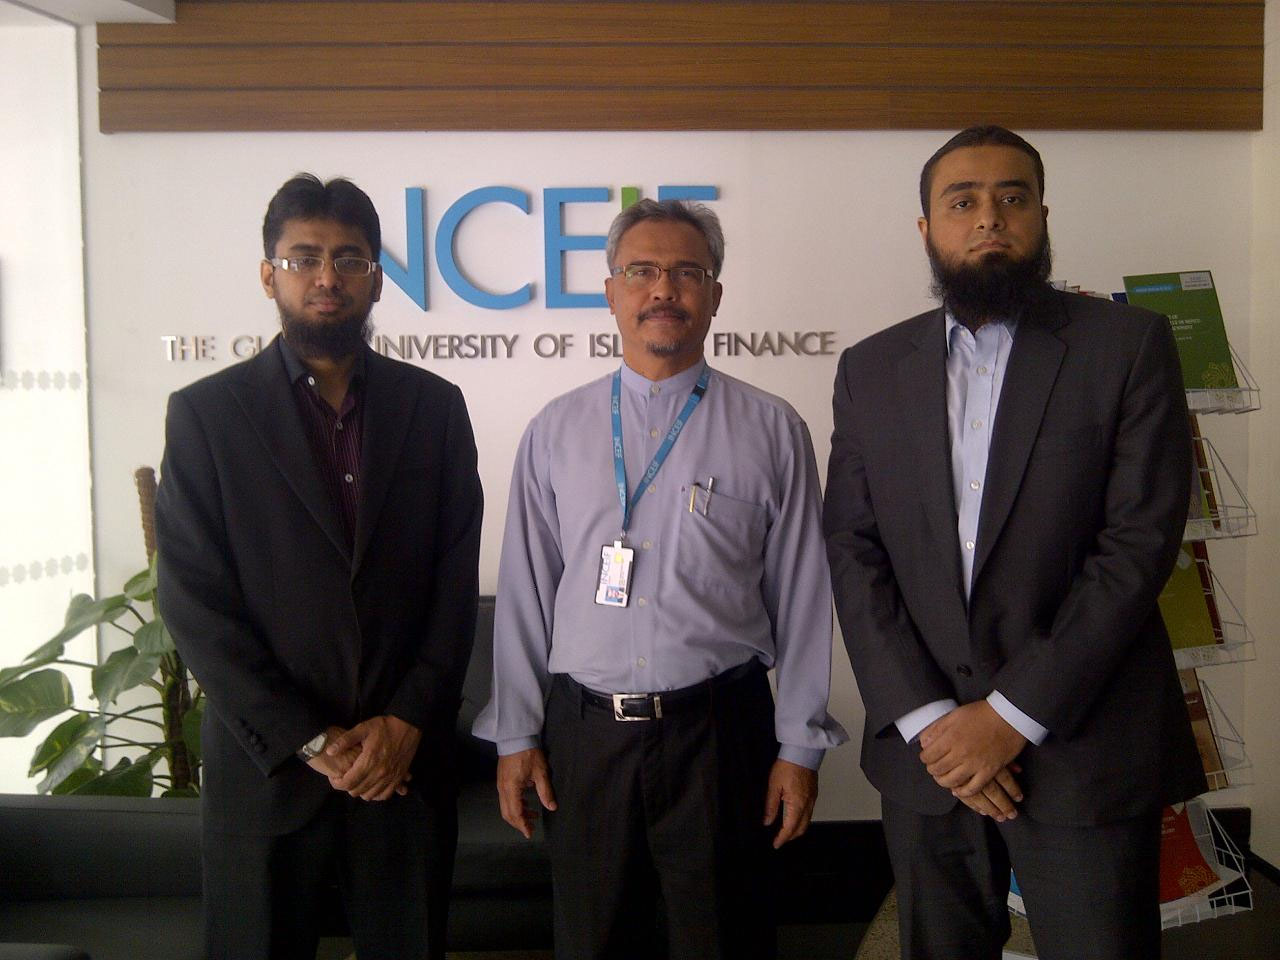 Seen in the photograph (from L to R): Mr. Ahmed Ali Siddiqui, Mr. Zainal Abdidin, Mr. Suleman Muhammad Ali